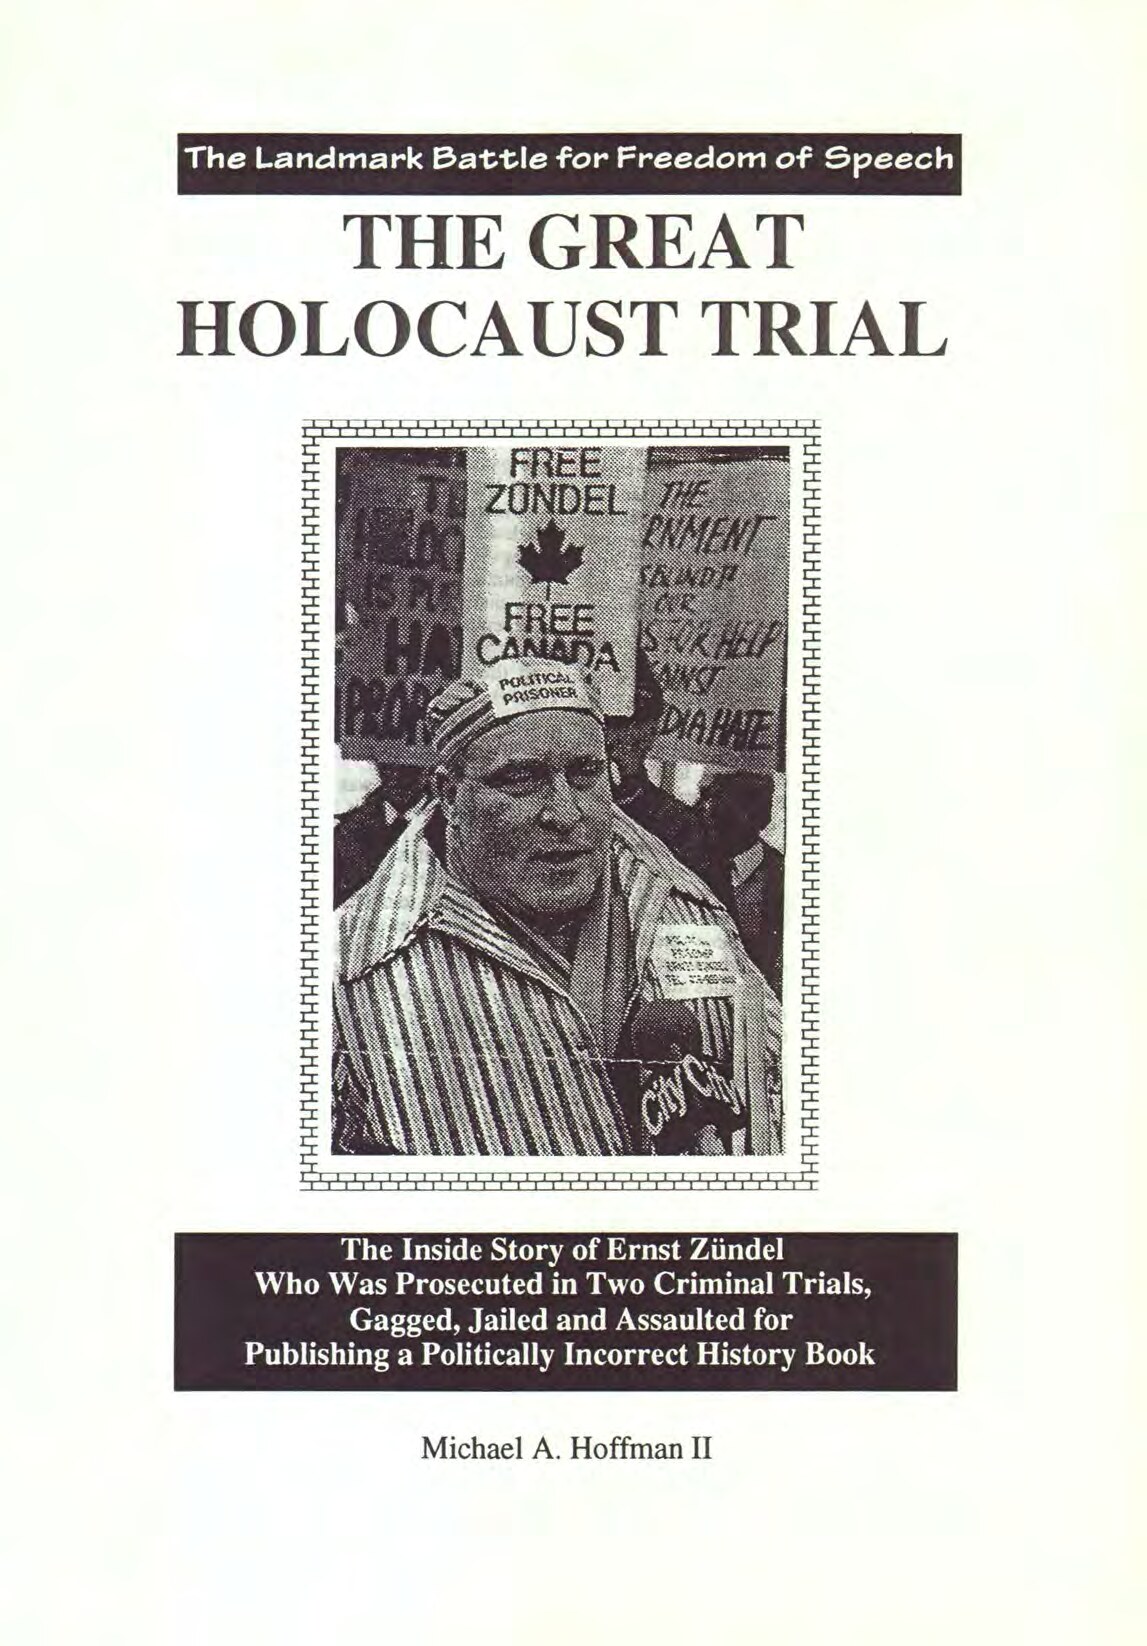 Hoffman, Michael A.; The Great Holocaust Trial